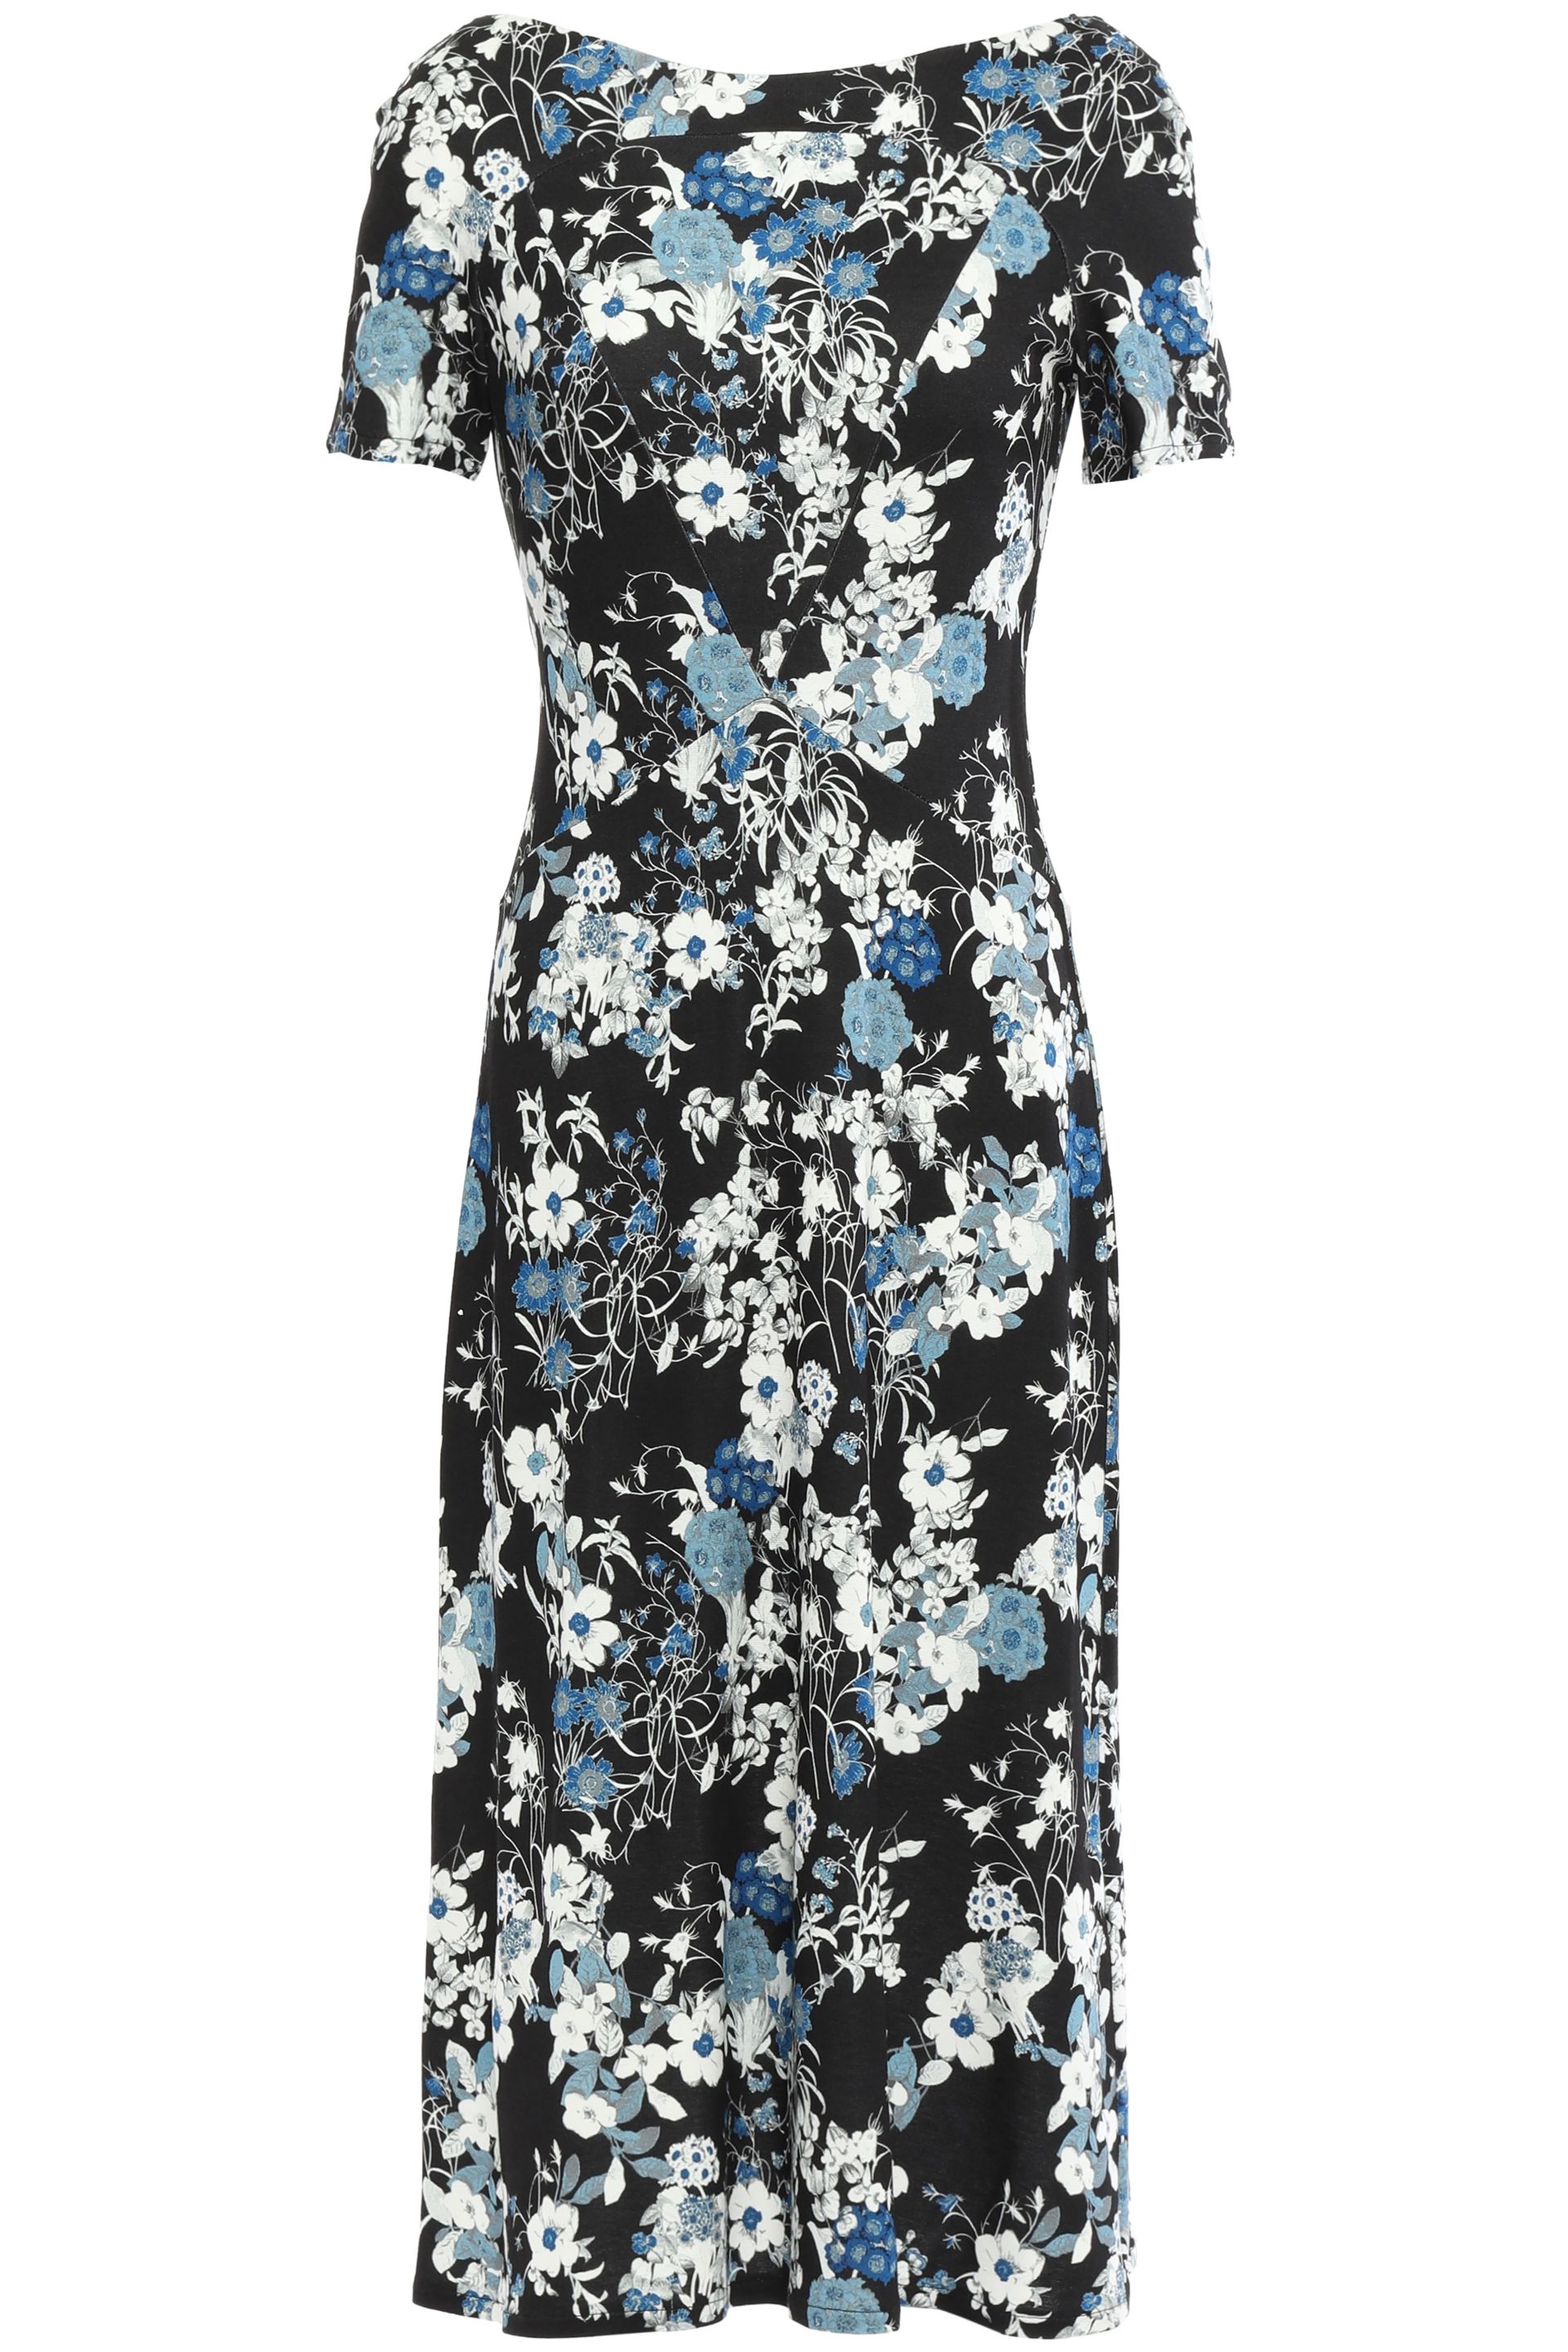 Erdem | Sale up to 70% off | GB | THE OUTNET